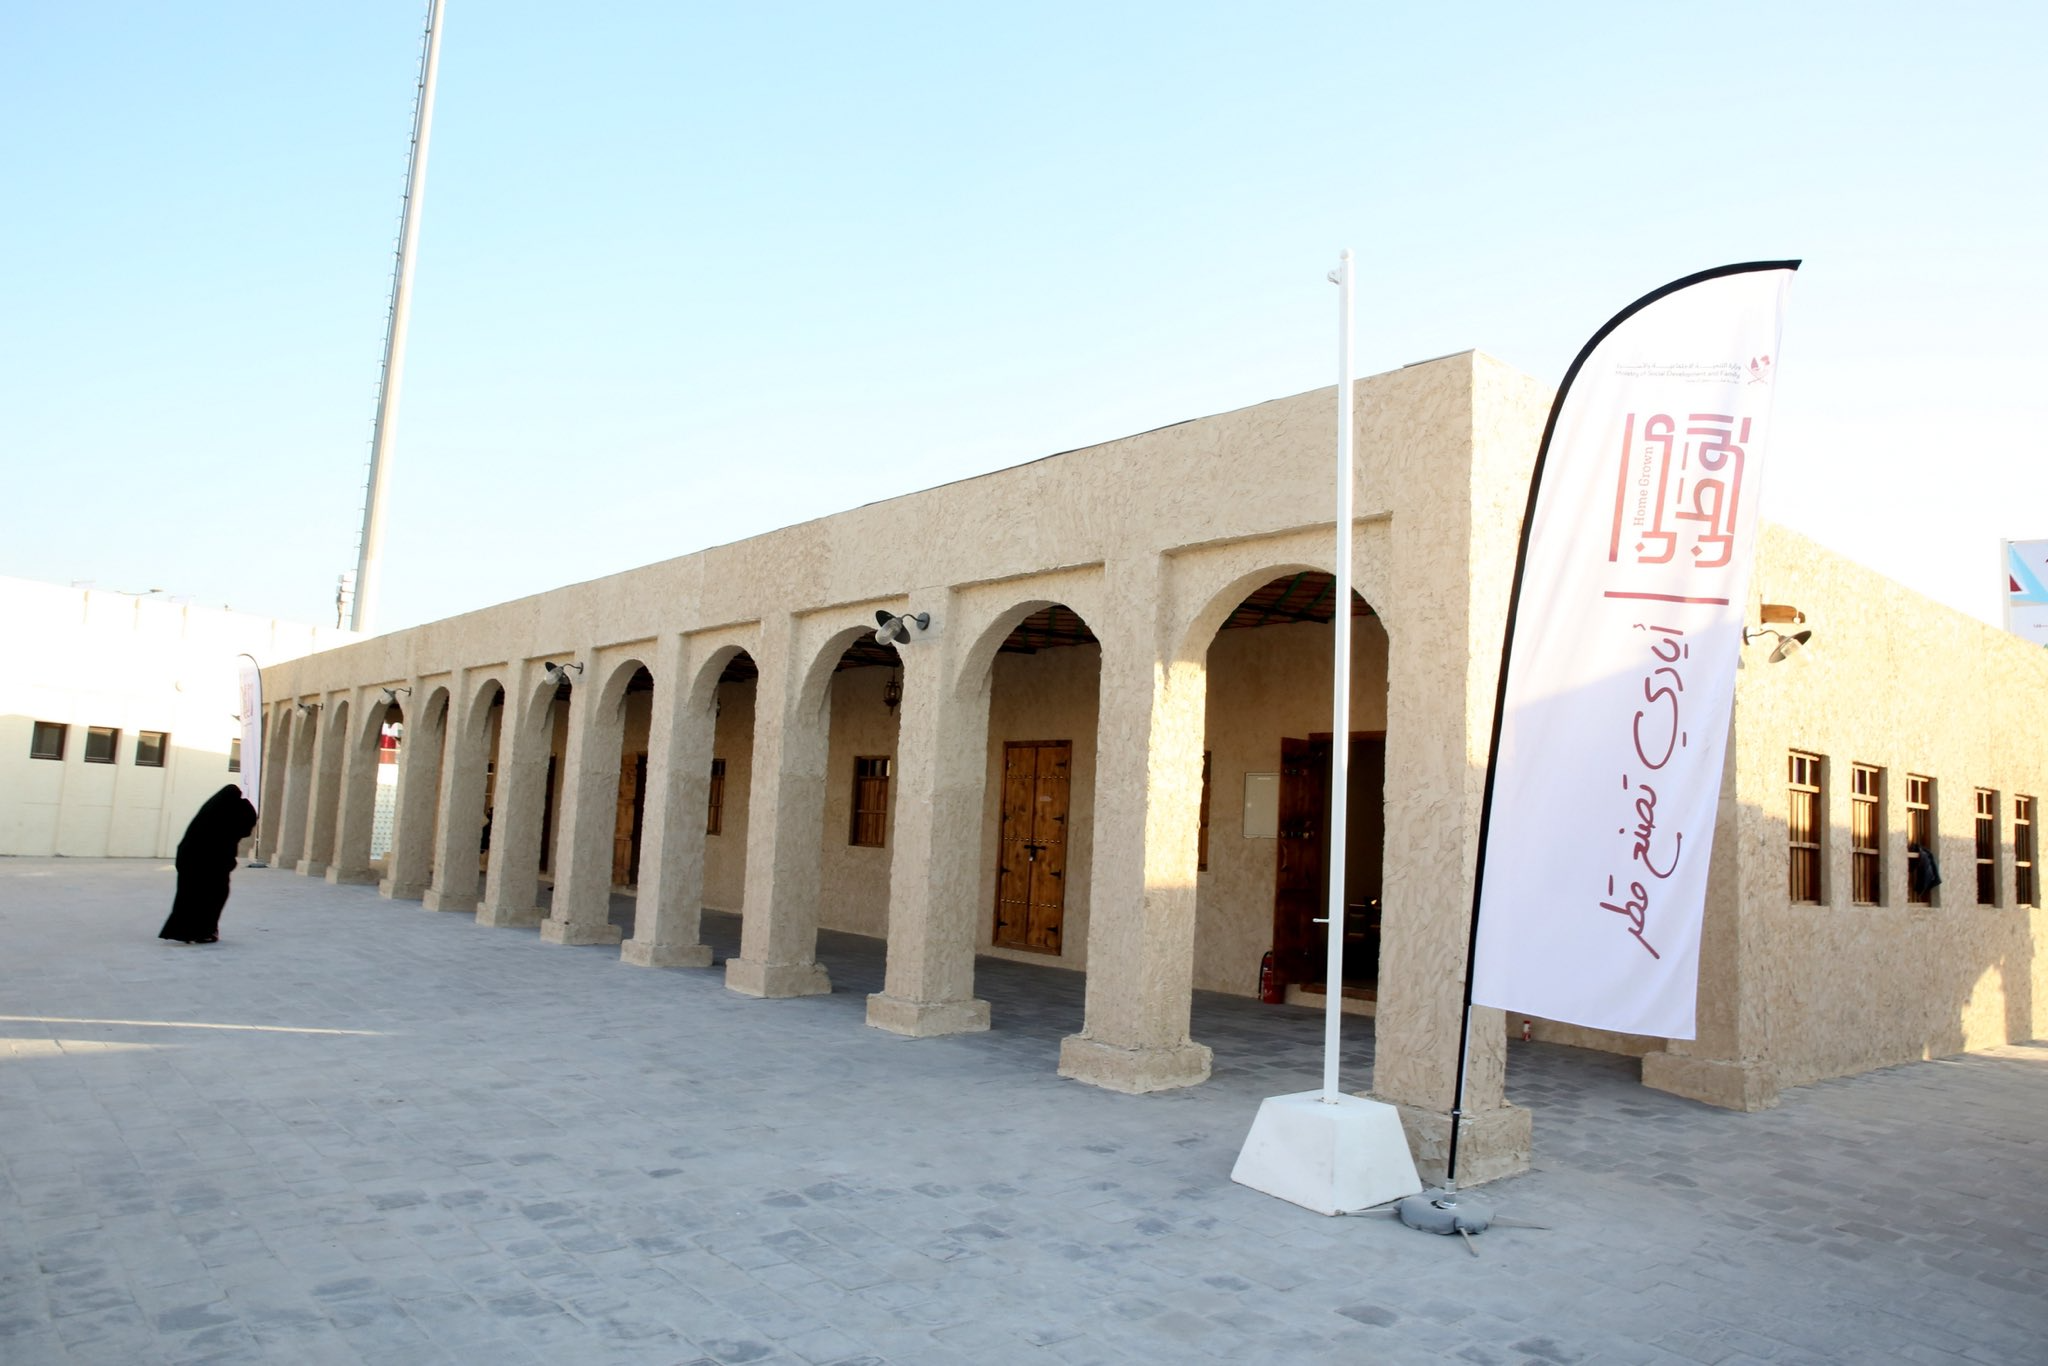 Ministry of Social Development and Family Inaugurates its Pavilion in Darb Al Saai